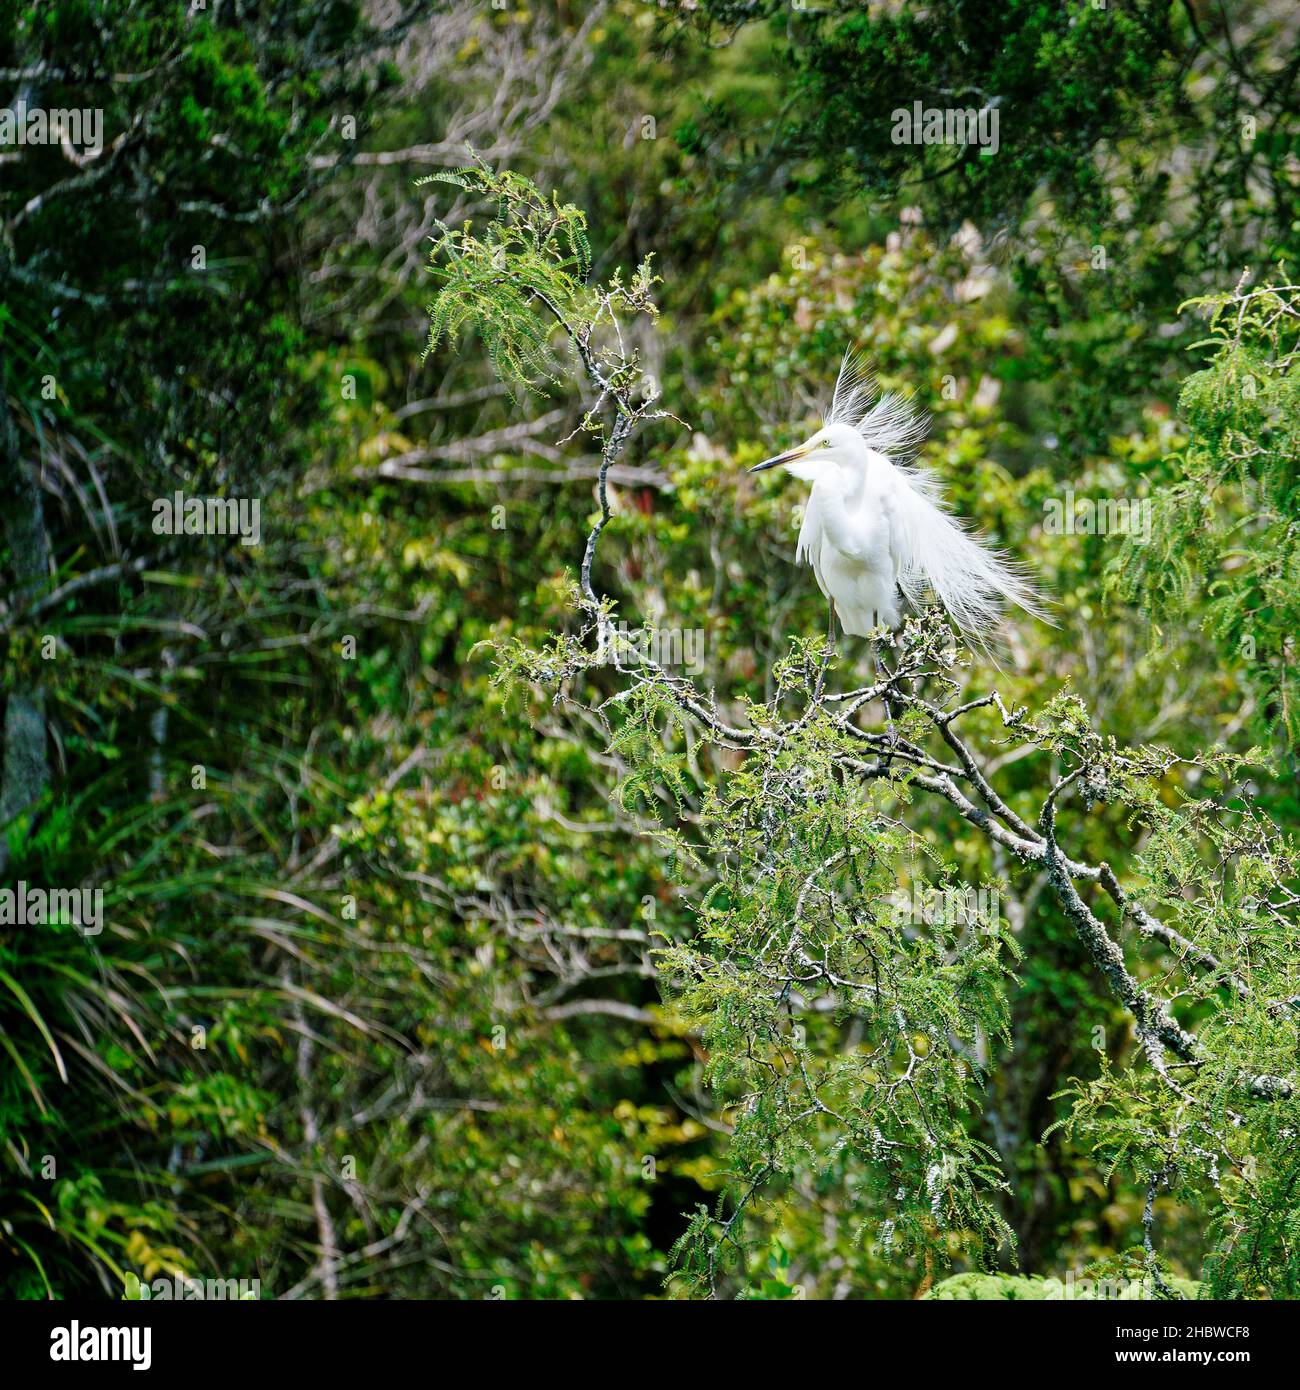 A white heron in breeding plumage at Waitangiroto Nature Reserve, south Westland, west coast, New Zealand. Looking like a bad hair day. Stock Photo